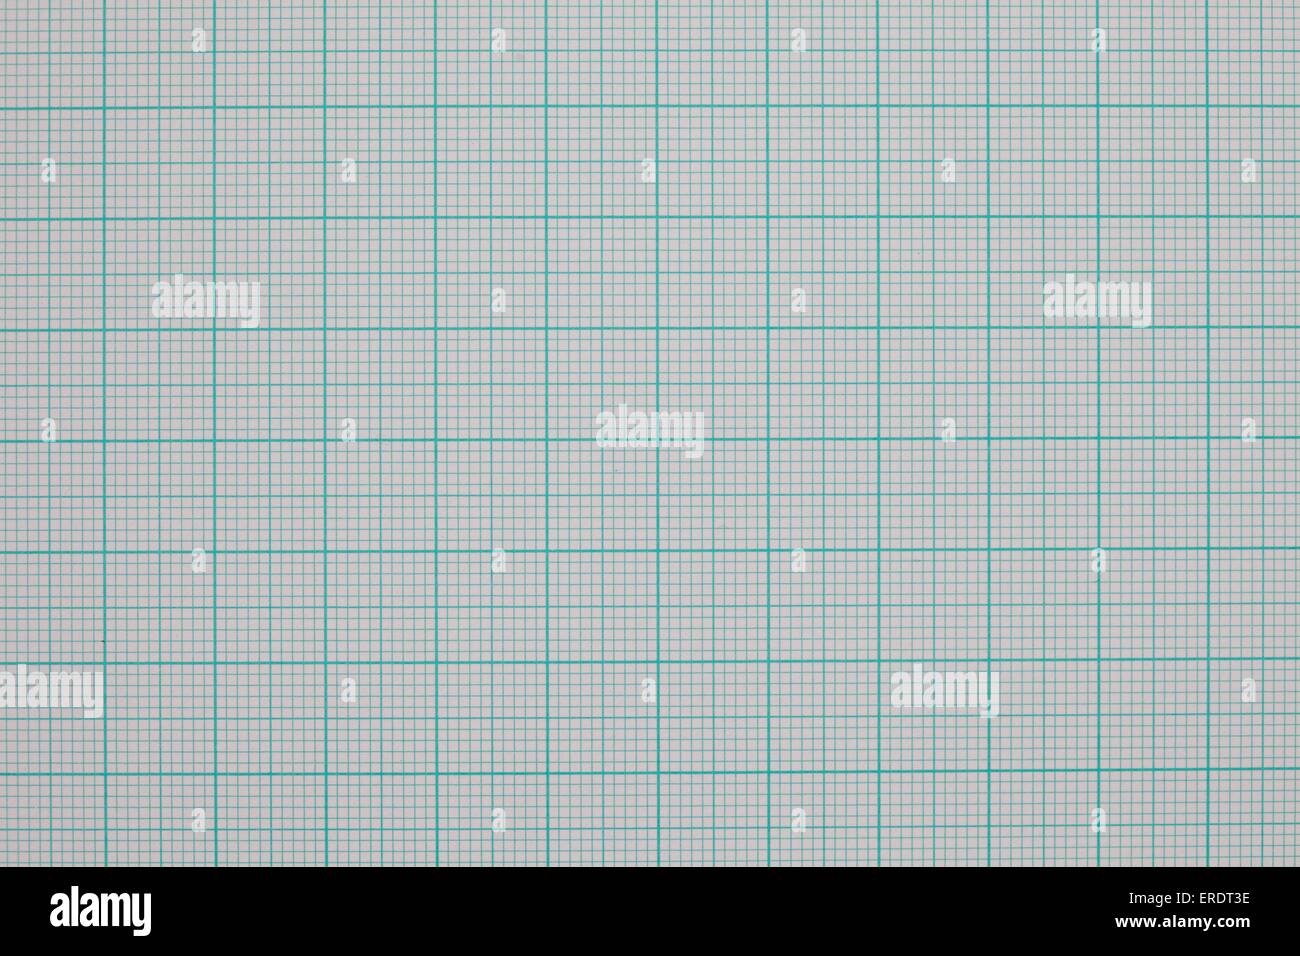 graph paper background Stock Photo